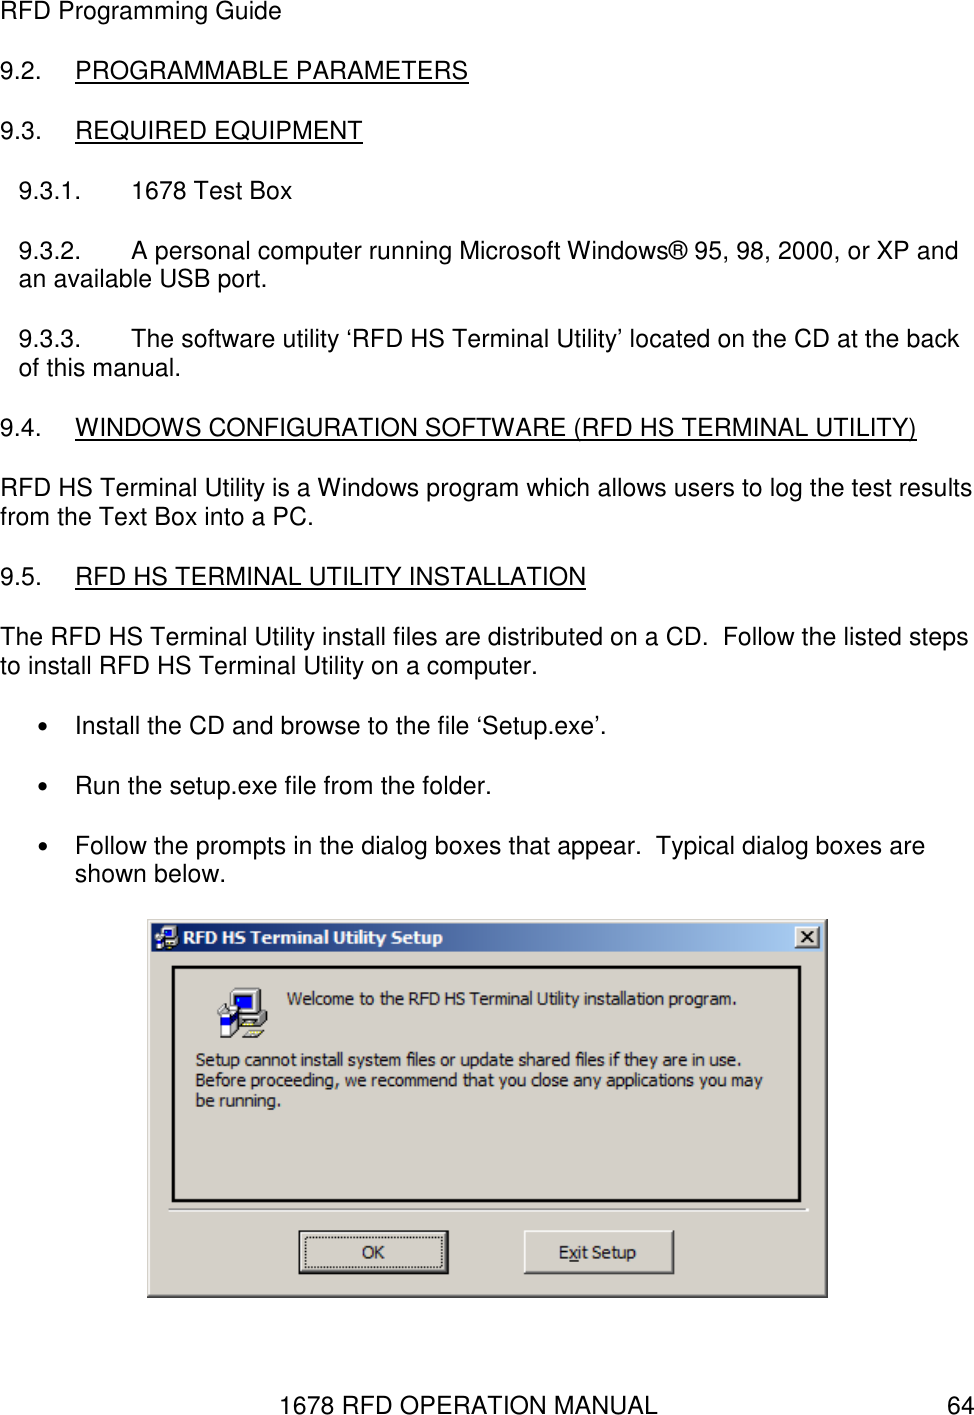 1678 RFD OPERATION MANUAL  64 RFD Programming Guide 9.2.  PROGRAMMABLE PARAMETERS 9.3.  REQUIRED EQUIPMENT 9.3.1.  1678 Test Box 9.3.2.  A personal computer running Microsoft Windows® 95, 98, 2000, or XP and an available USB port. 9.3.3.  The software utility ‘RFD HS Terminal Utility’ located on the CD at the back of this manual. 9.4.  WINDOWS CONFIGURATION SOFTWARE (RFD HS TERMINAL UTILITY) RFD HS Terminal Utility is a Windows program which allows users to log the test results from the Text Box into a PC. 9.5.  RFD HS TERMINAL UTILITY INSTALLATION The RFD HS Terminal Utility install files are distributed on a CD.  Follow the listed steps to install RFD HS Terminal Utility on a computer. • Install the CD and browse to the file ‘Setup.exe’. • Run the setup.exe file from the folder. • Follow the prompts in the dialog boxes that appear.  Typical dialog boxes are shown below.  